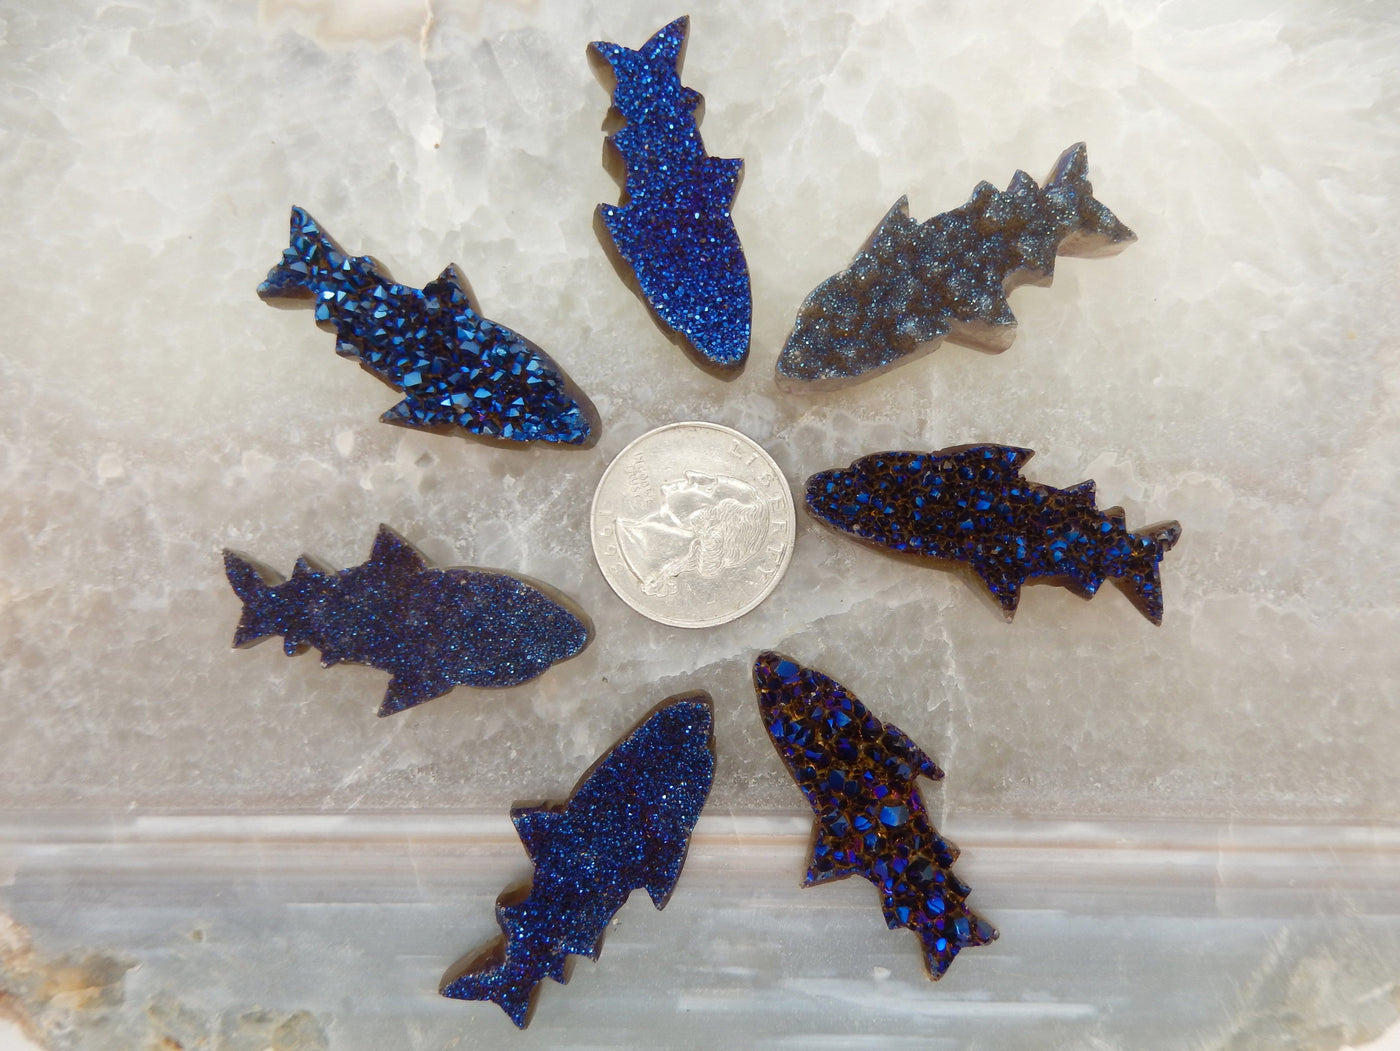 7 Mystic Blue Shark around a quarter for size reference 